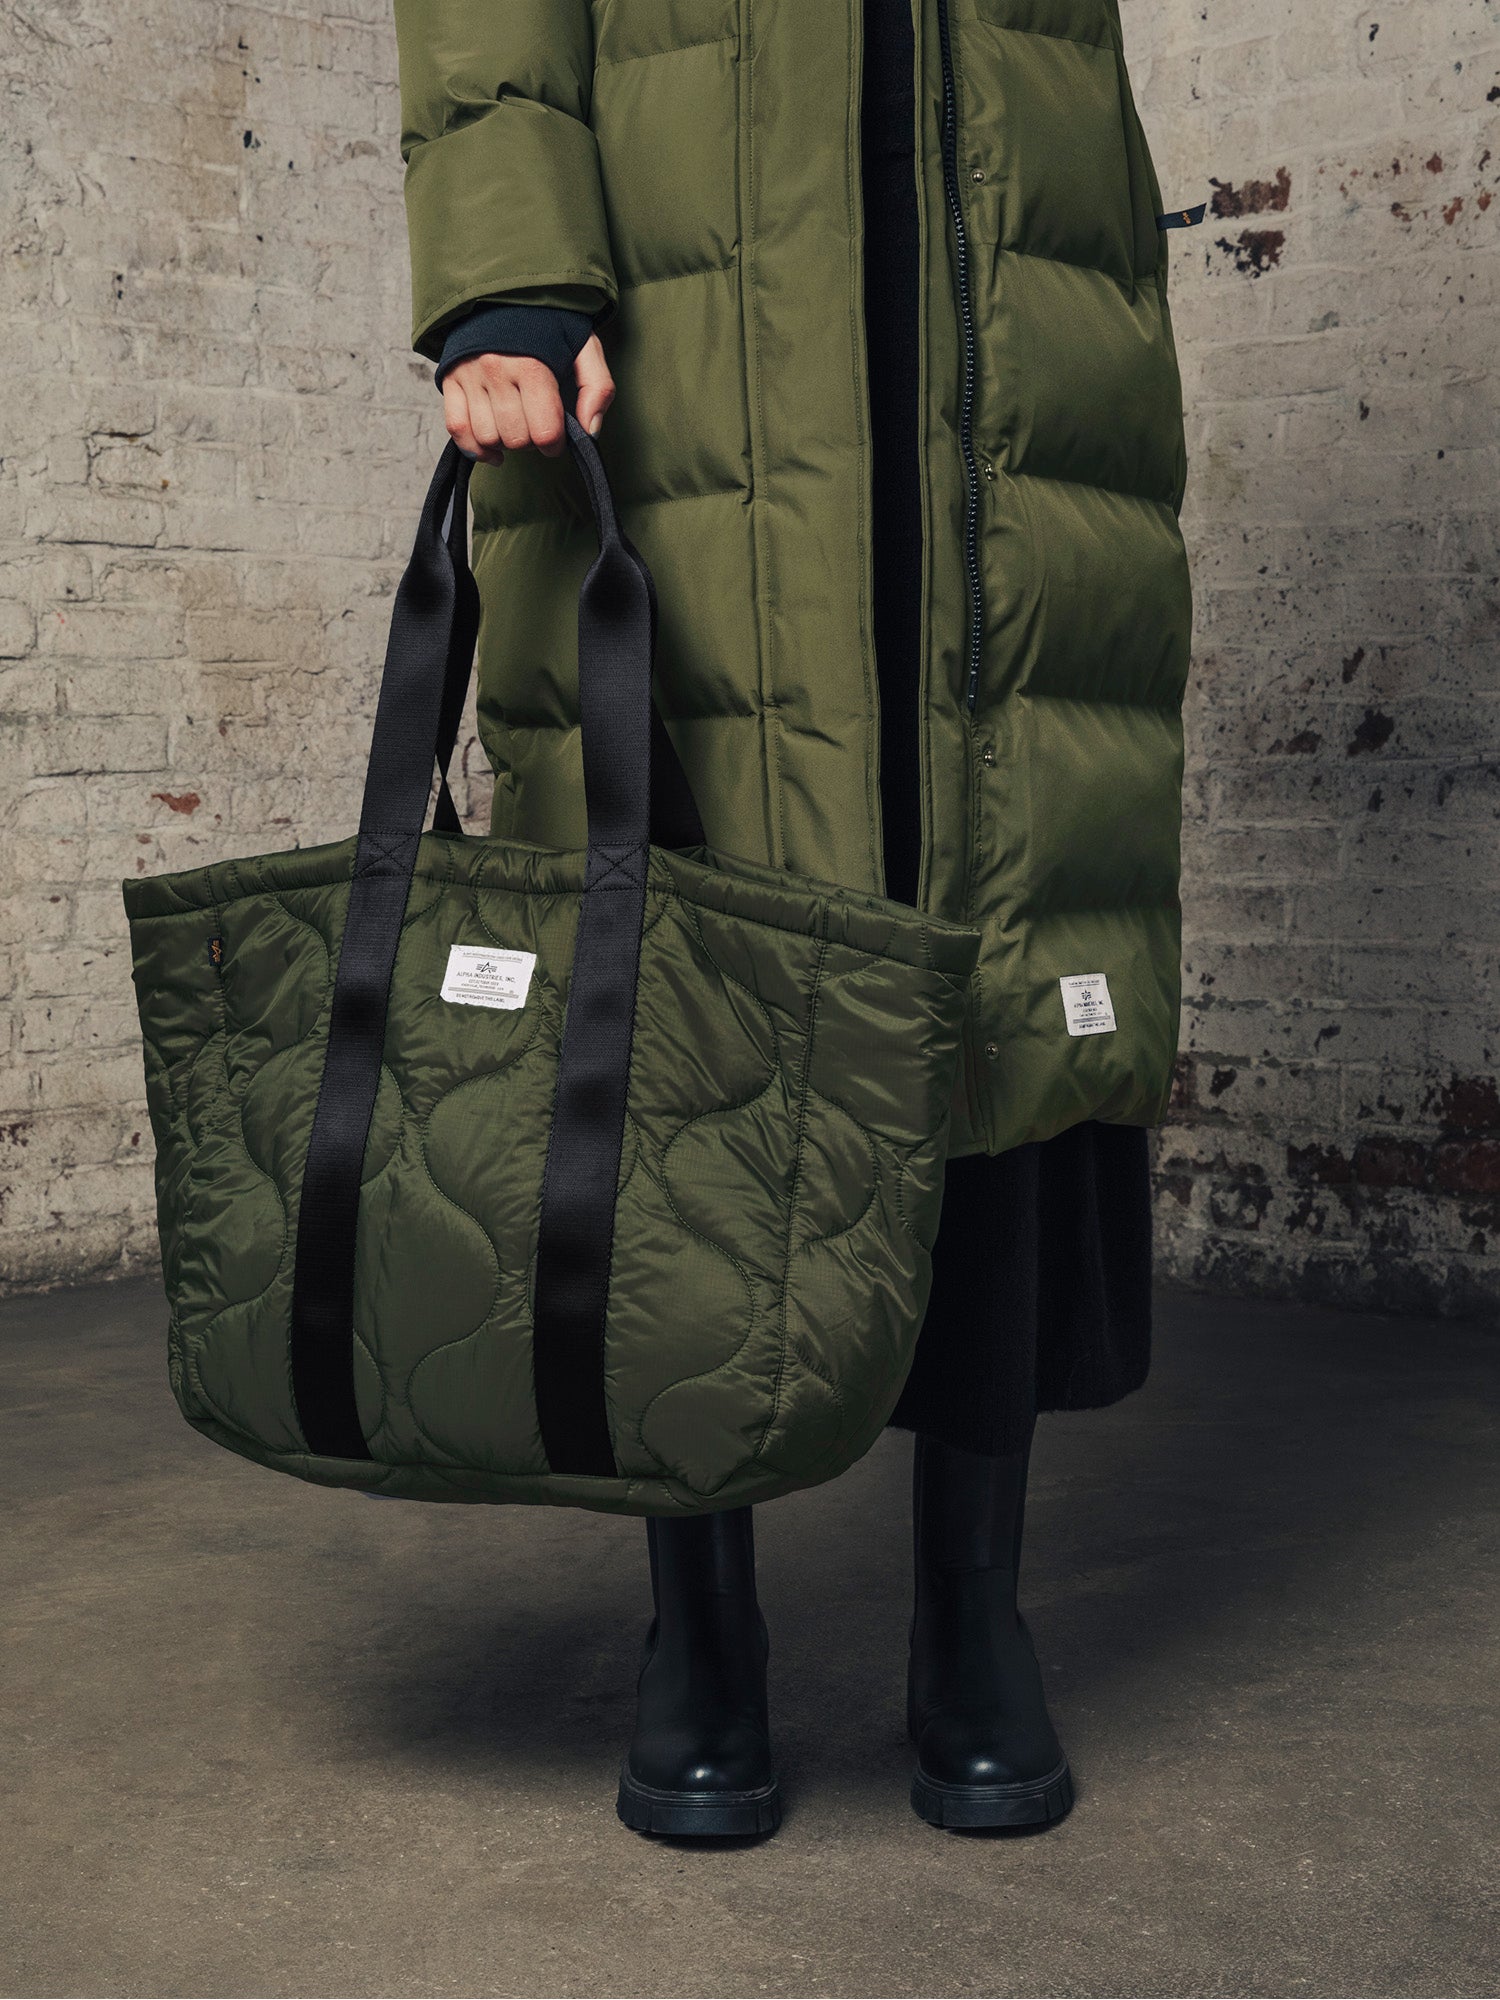 QUILTED TOTE BAG ACCESSORY Alpha Industries 